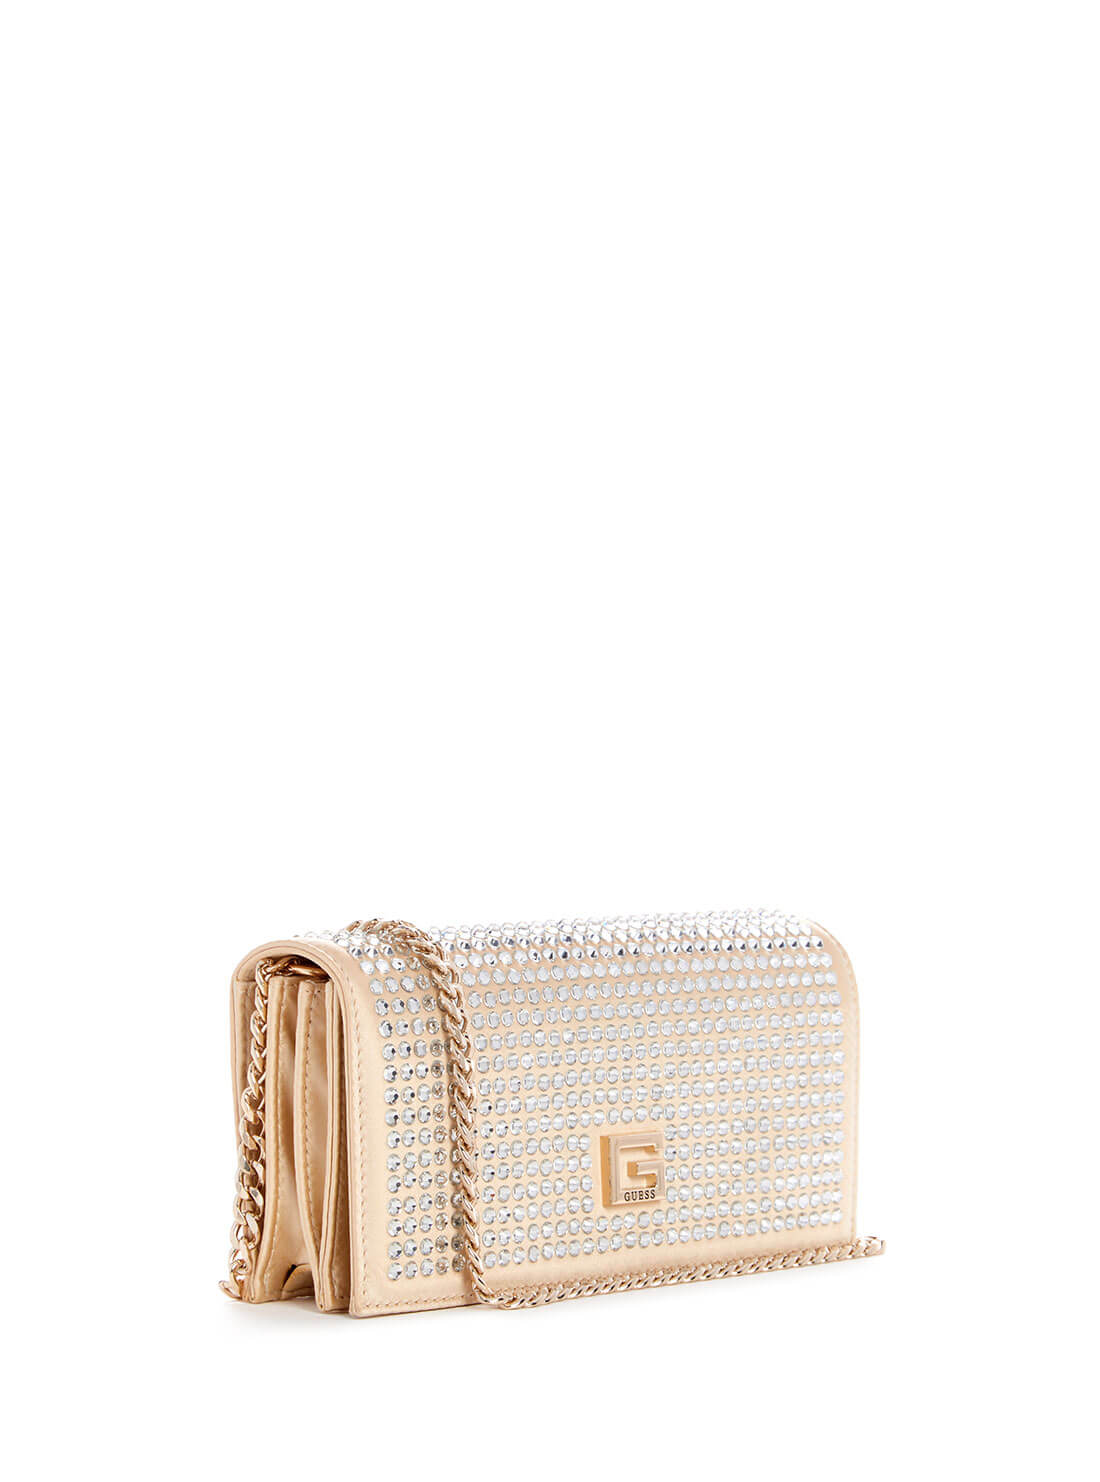 Women's Gold Gilded Glamour Crossbody Clutch front view alternative